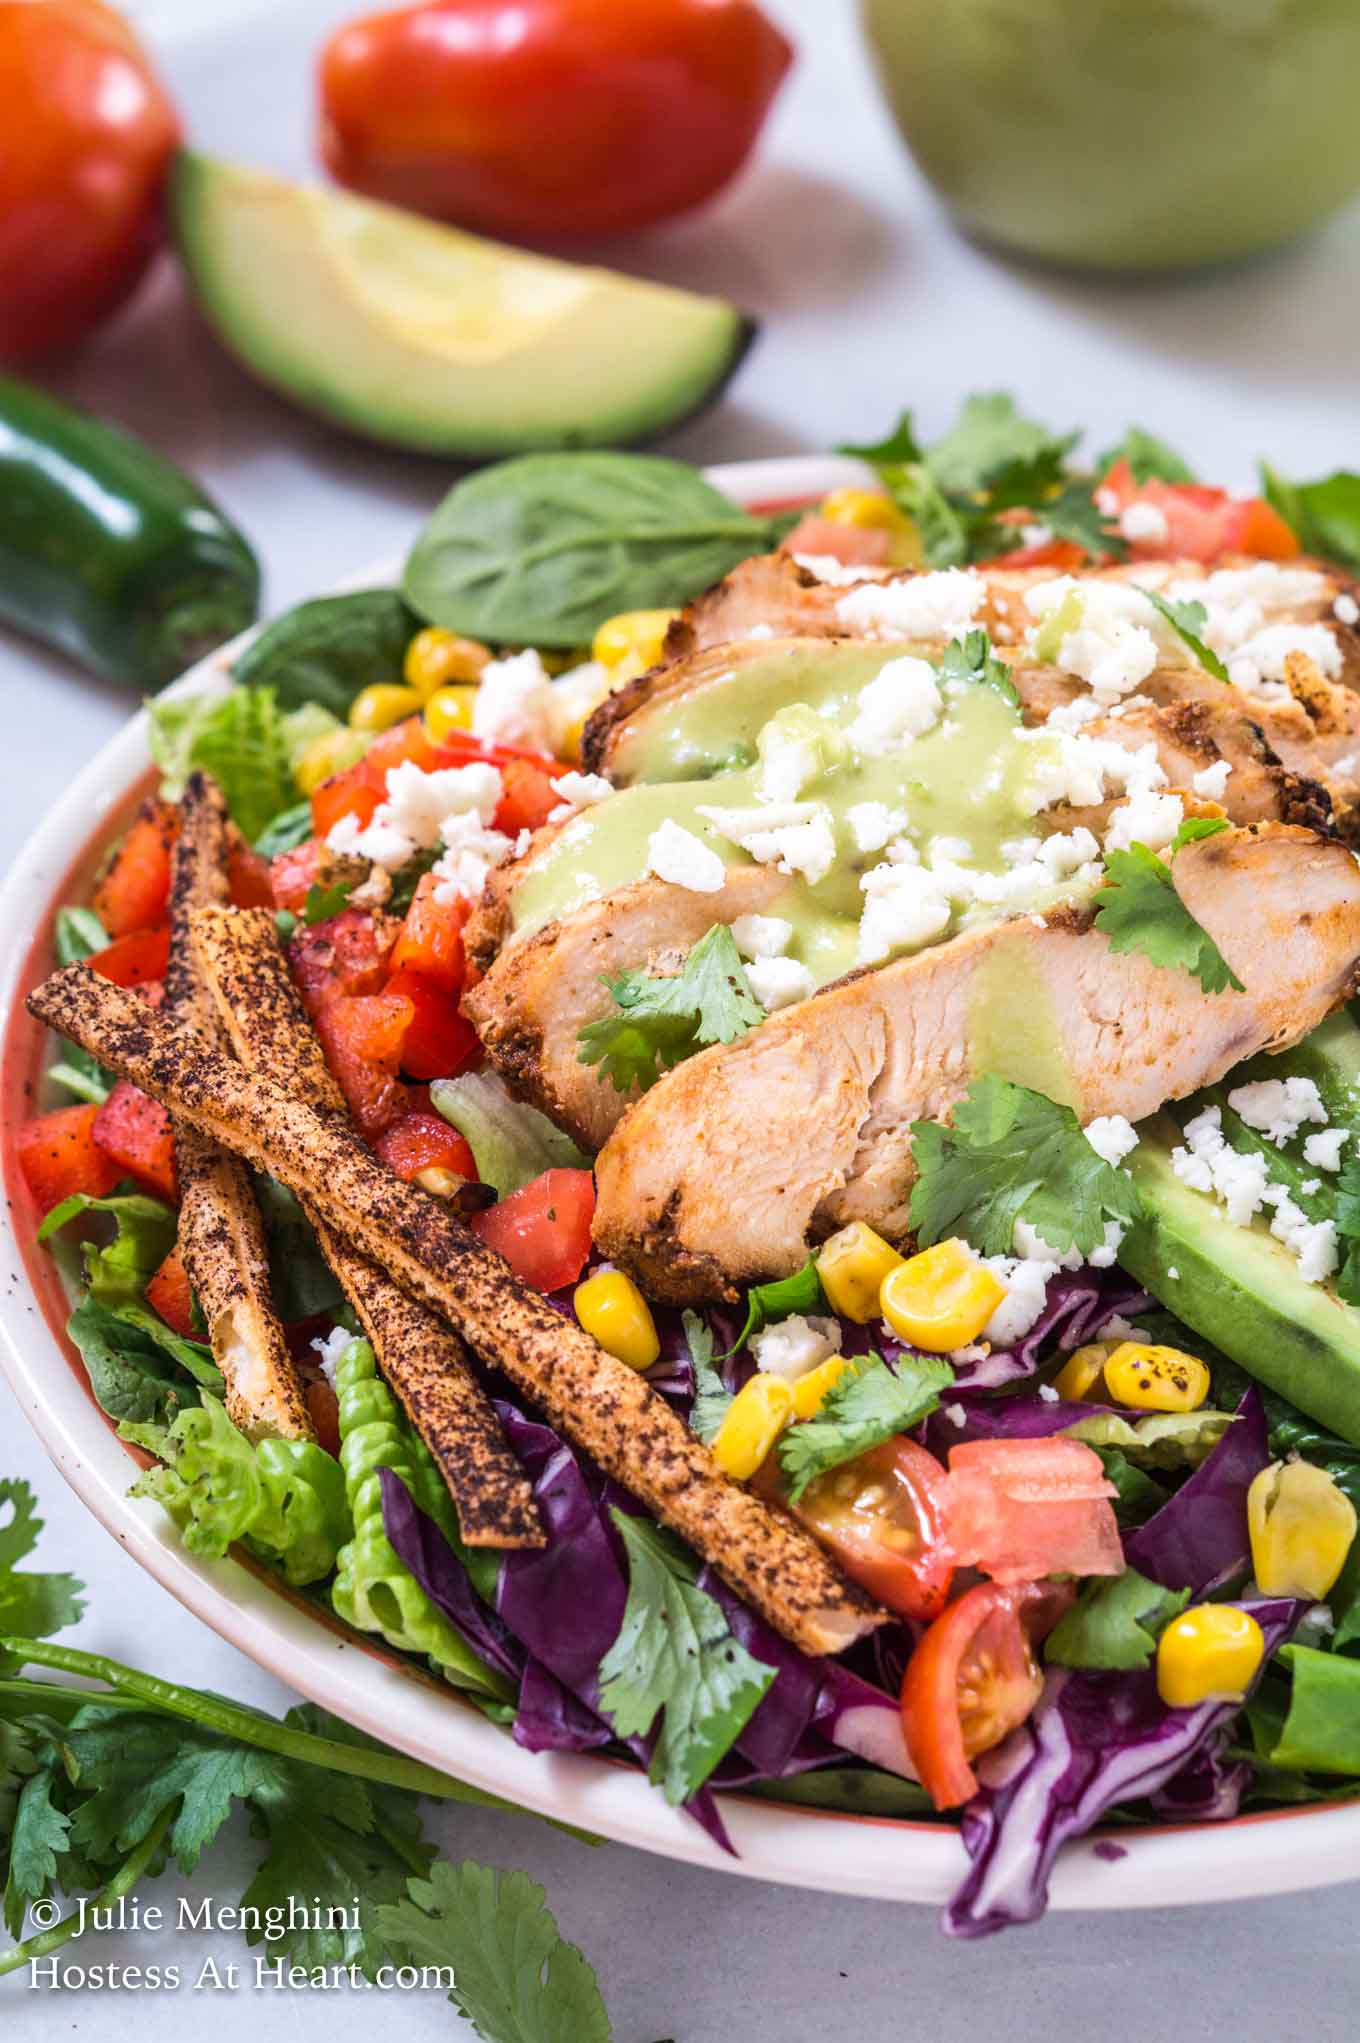 Partial front view of a green salad topped with slices of chipotle grilled chicken, sliced avocado, shredded purple cabbage, diced tomato, grilled corn, and tortilla straws and then garnished with fresh cilantro. A fresh tomato, jalapeno, and avocado sit in the background.